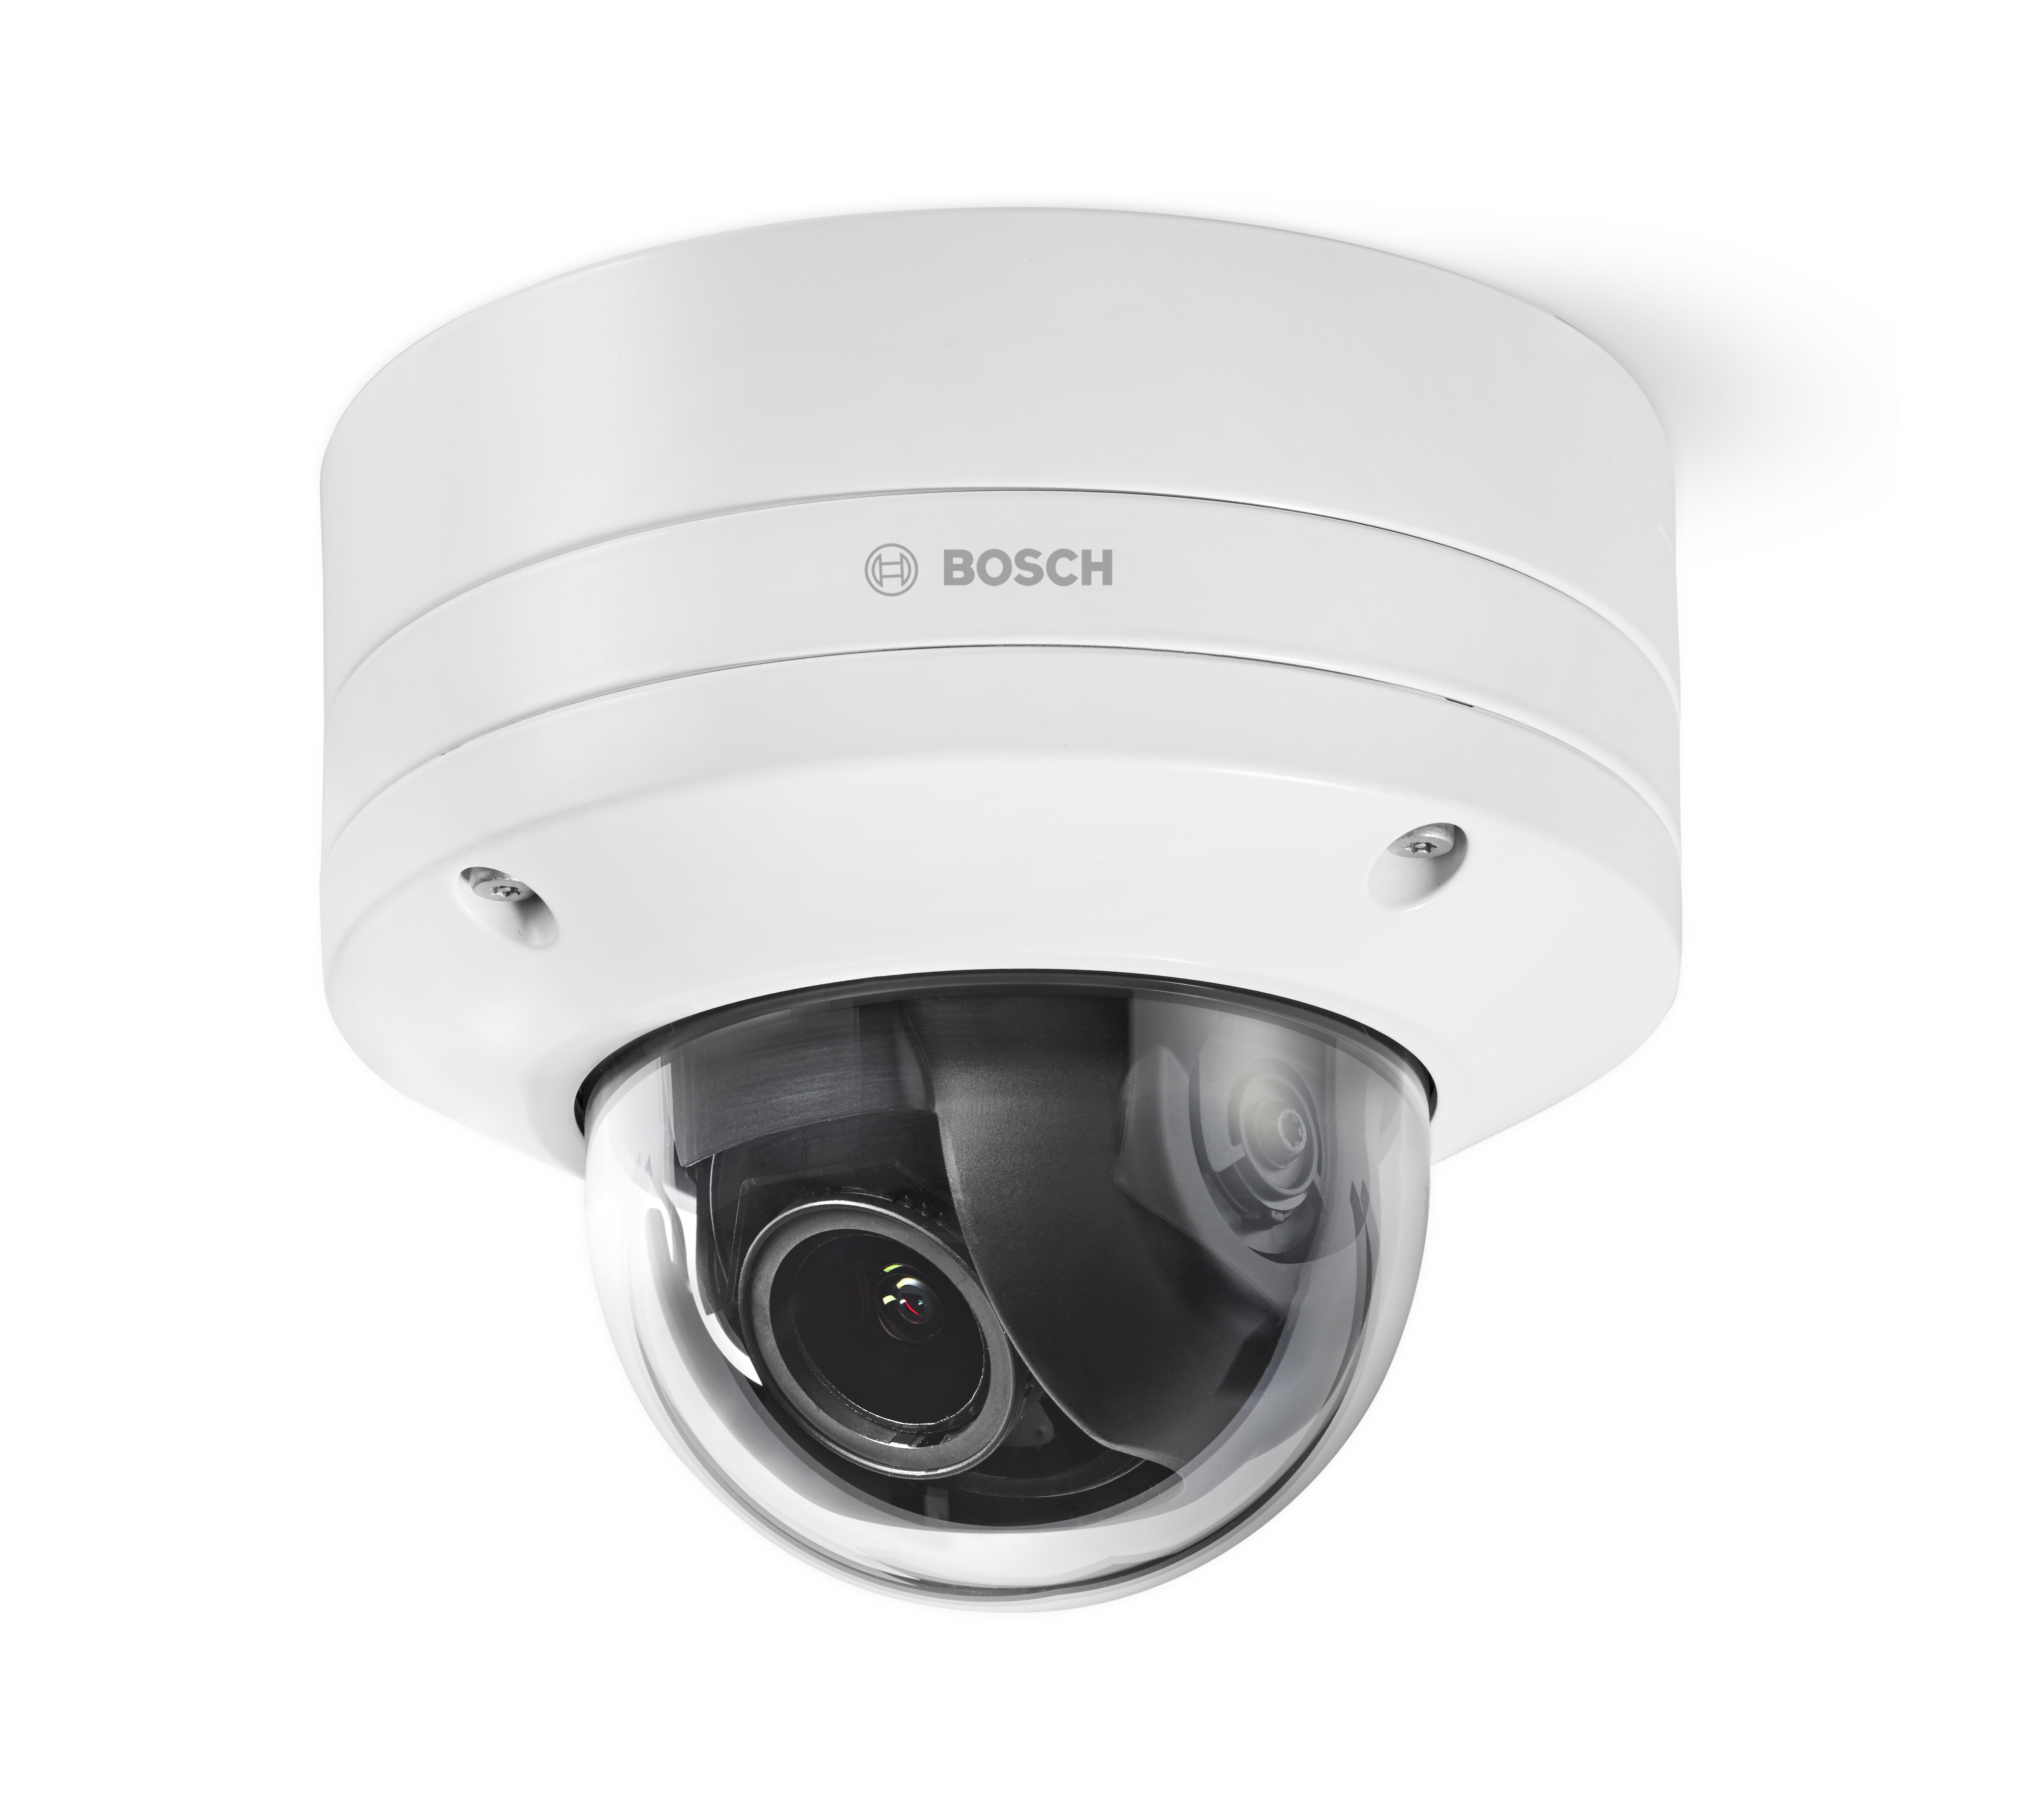 Bosch Security Systems - Dome fixe 2MP teleobjectif PTRZ HDRX H.265 IVA IP66